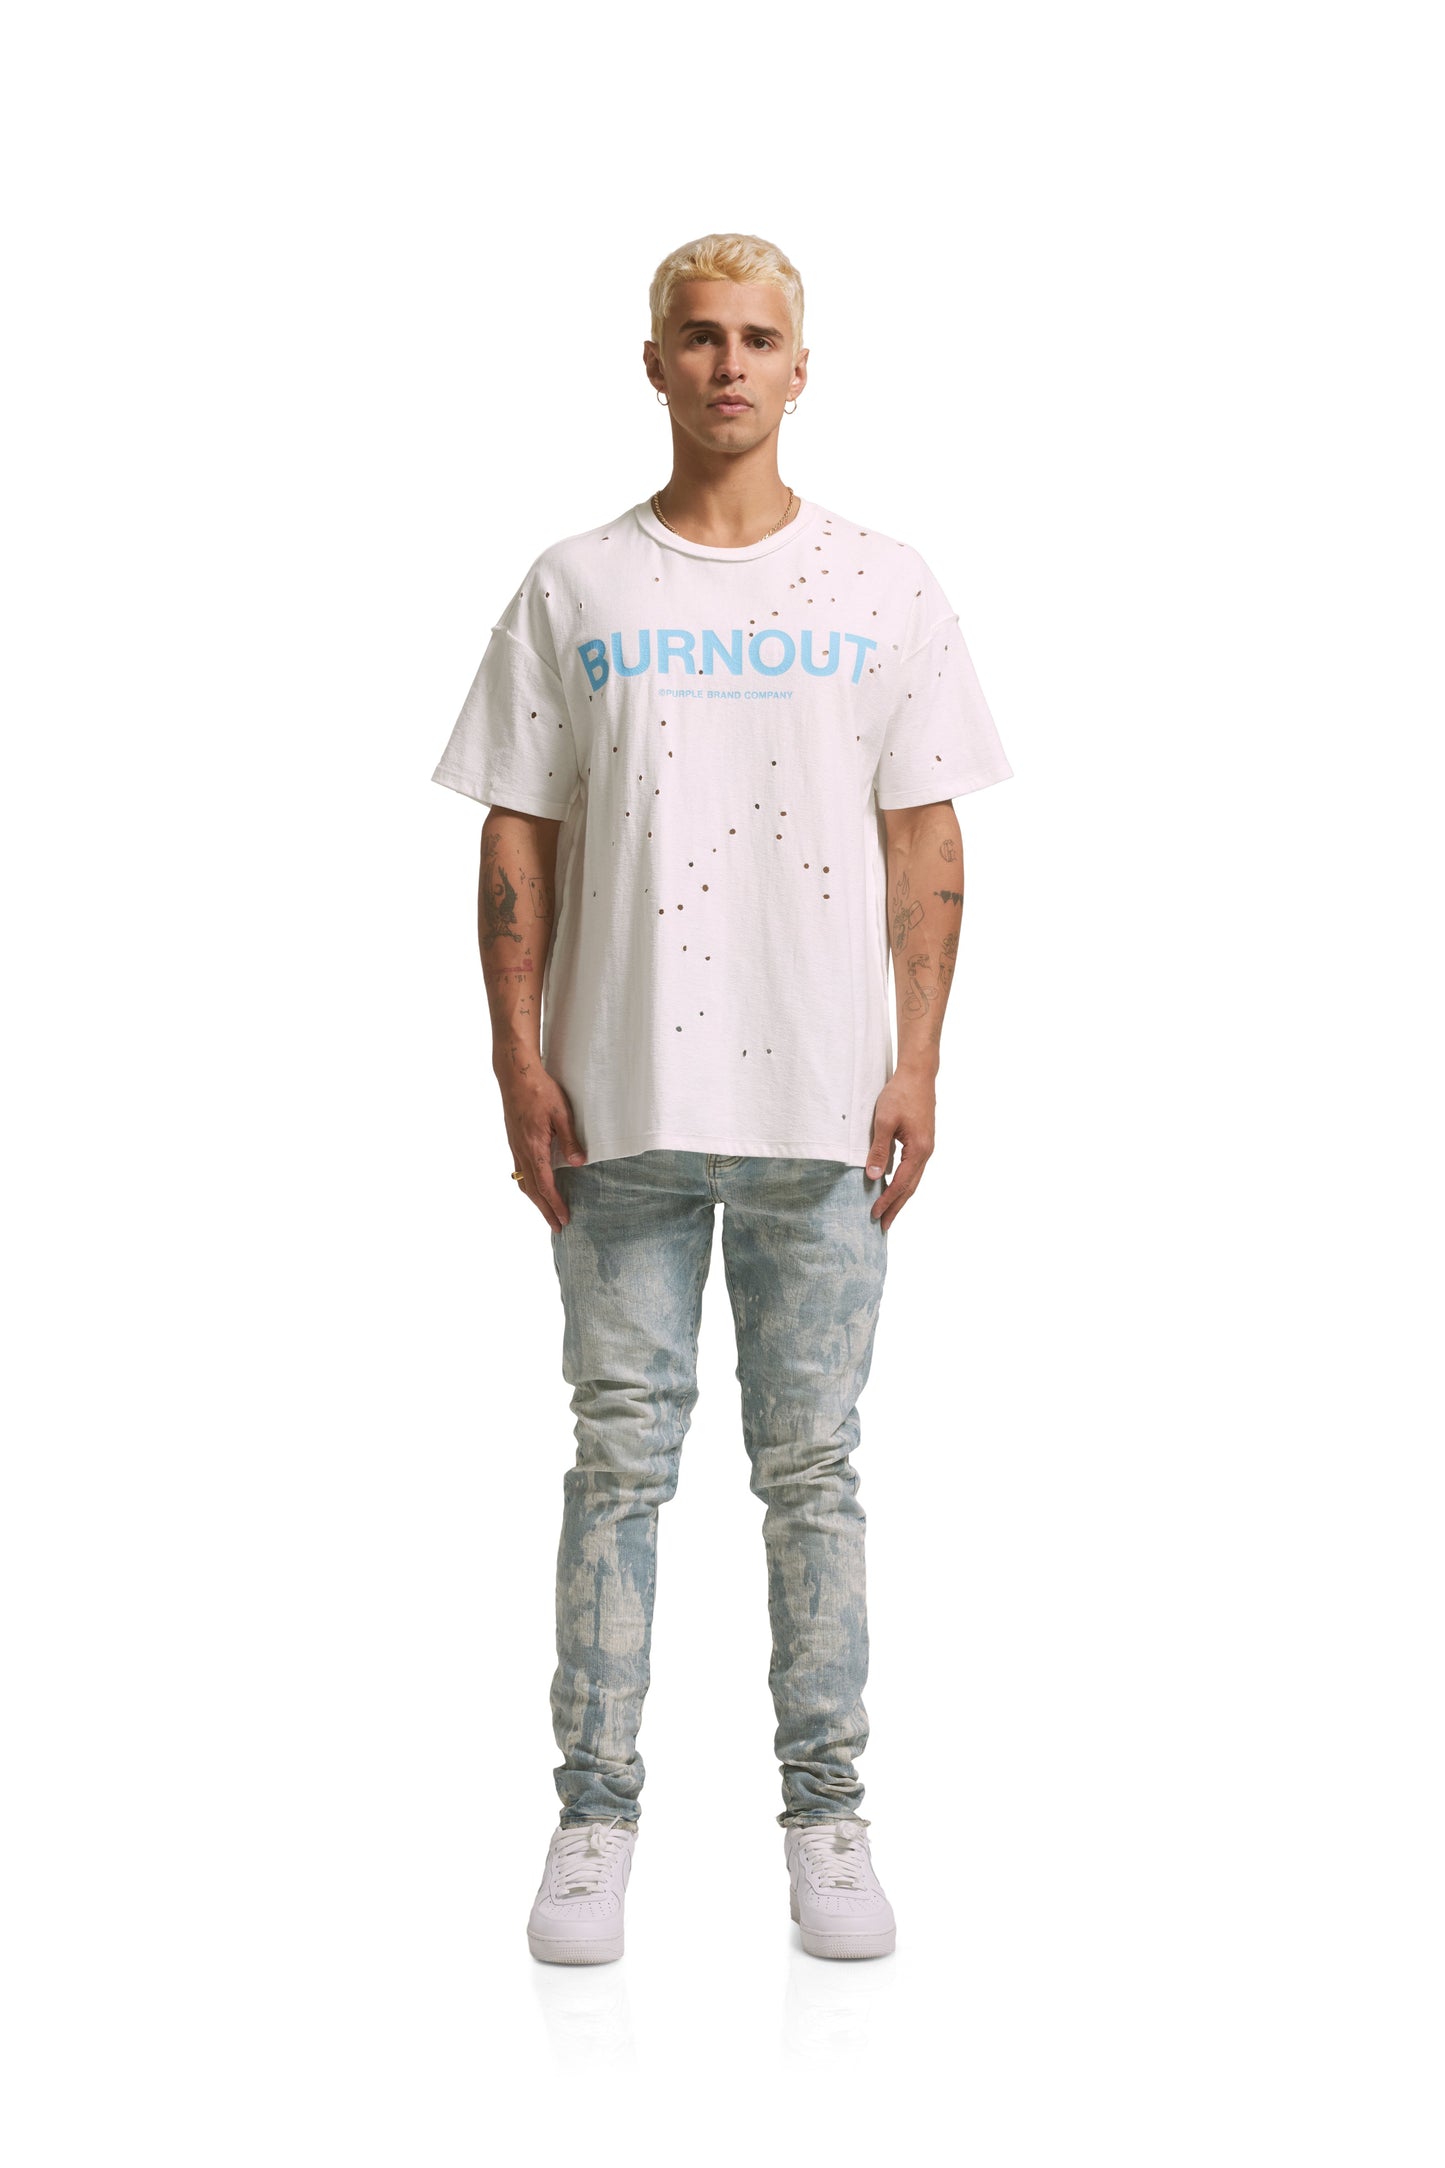 P101 RELAXED FIT TEE - Burnout Brilliant White